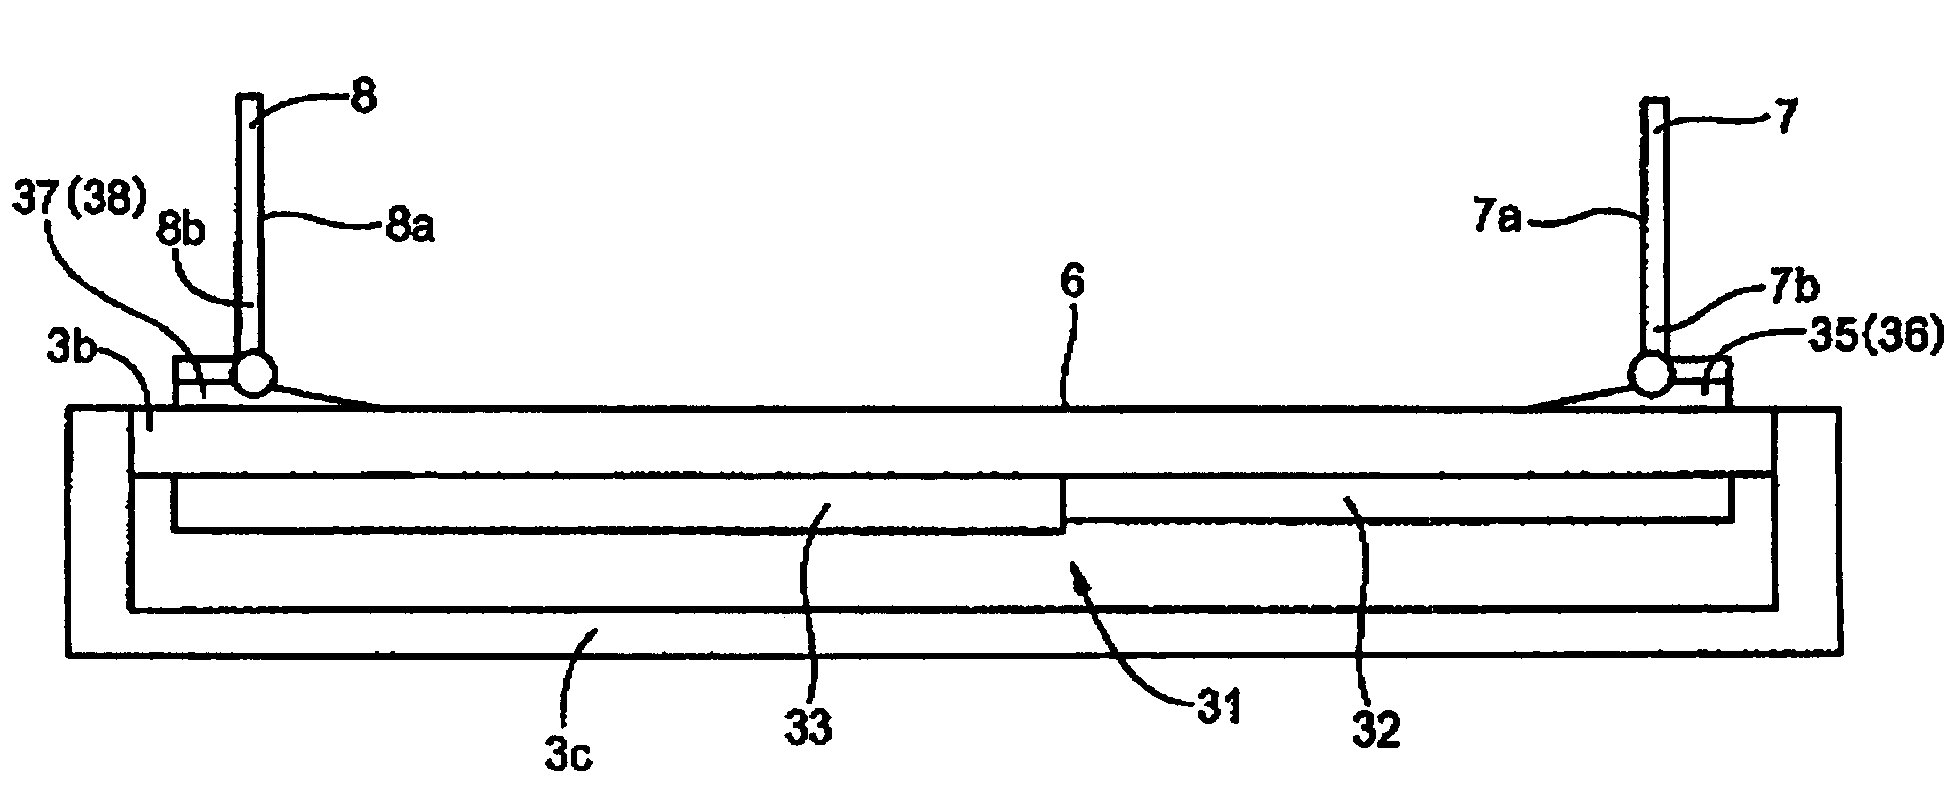 Apparatus for feeding sheet using retractable edge guide for guiding lateral edge of sheet